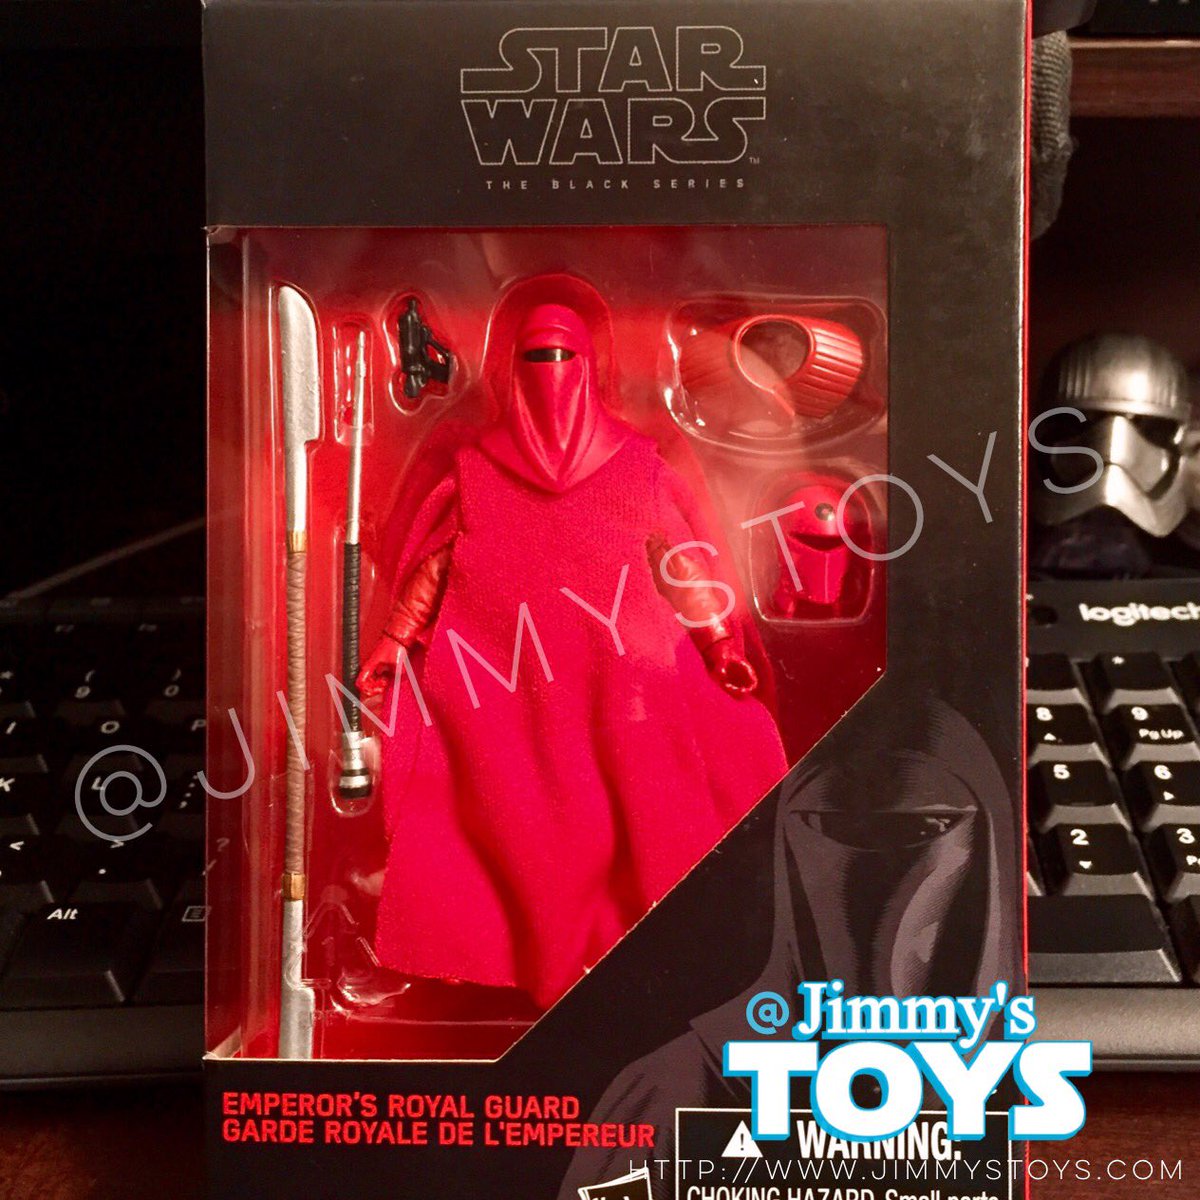 Stopped in a random #Walmart on the way home & got the #Exclusive 3.75' #BlackSeries #EmperorsRoyalGuard! #StarWars #ToyHunt #JimmysToys